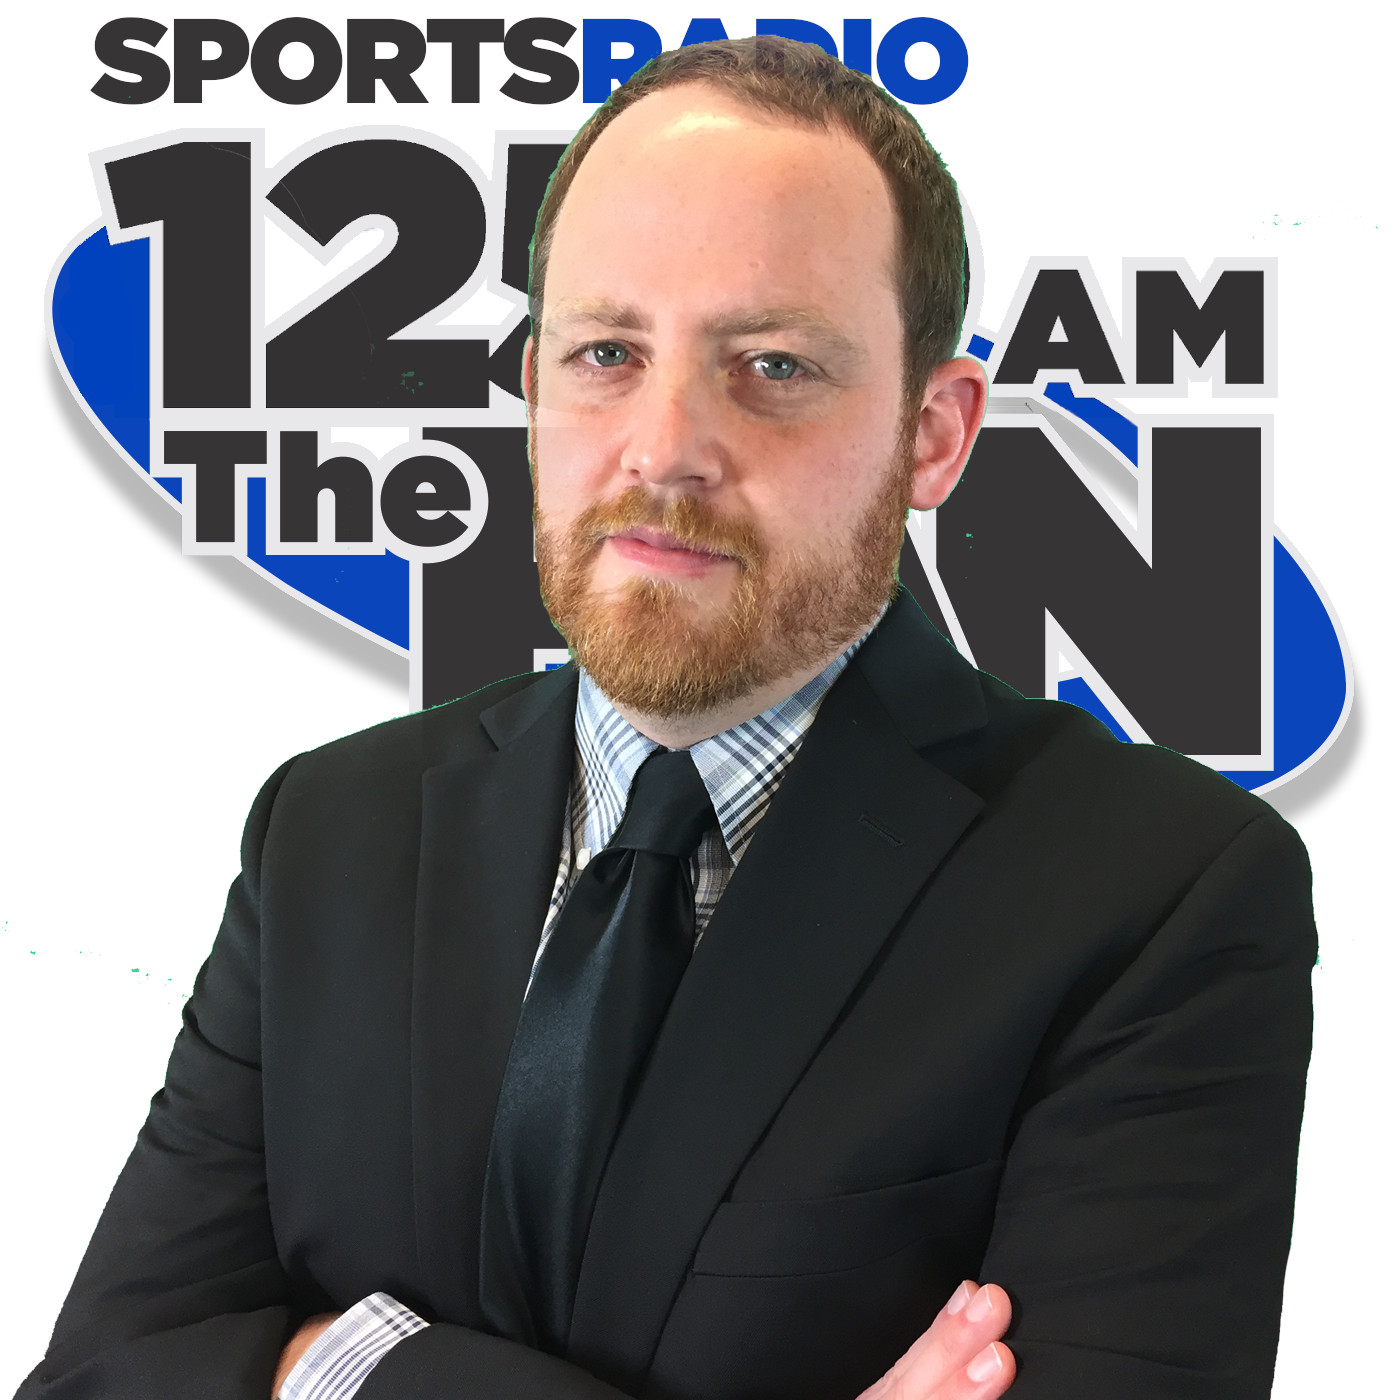 9 AM - More Rodgers and Zach Gelb joins the show